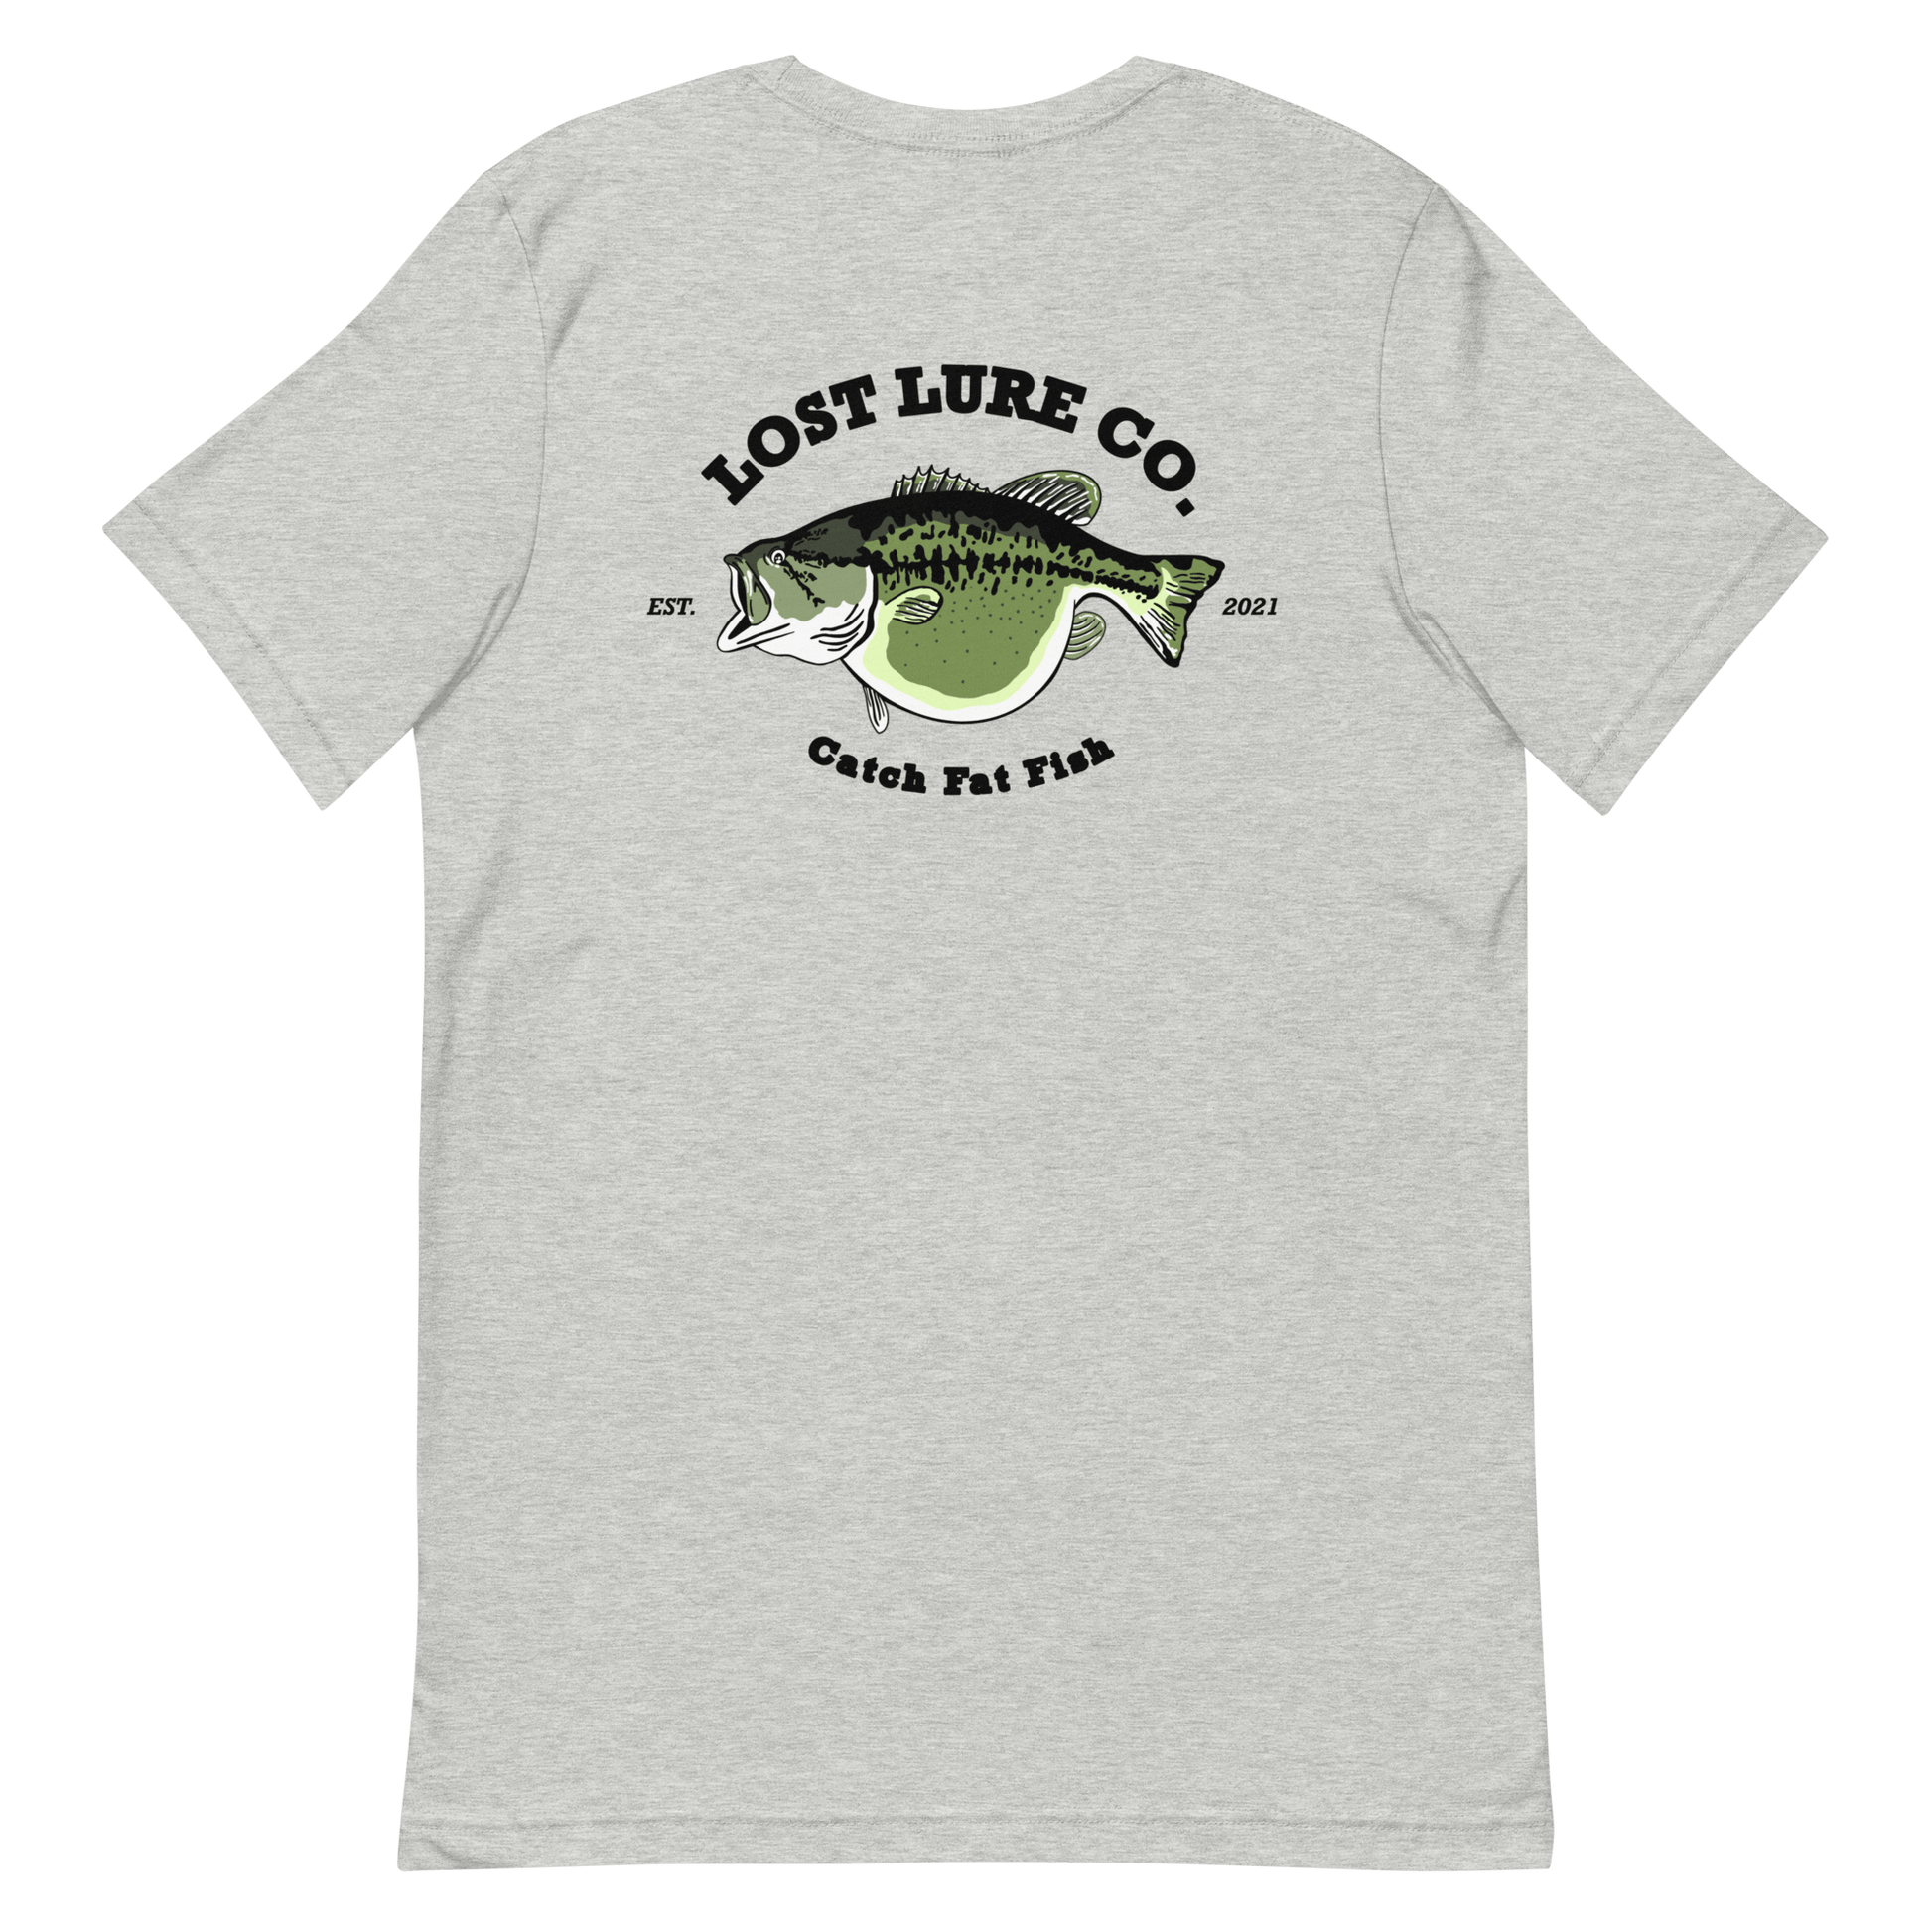 Bass fishing shirt. It has a drawing of a fat bass and it reads “lost lure co, catch fat fish”. The bass design is on the back, the lost lure logo is on the front. Light gray shirt, back side 